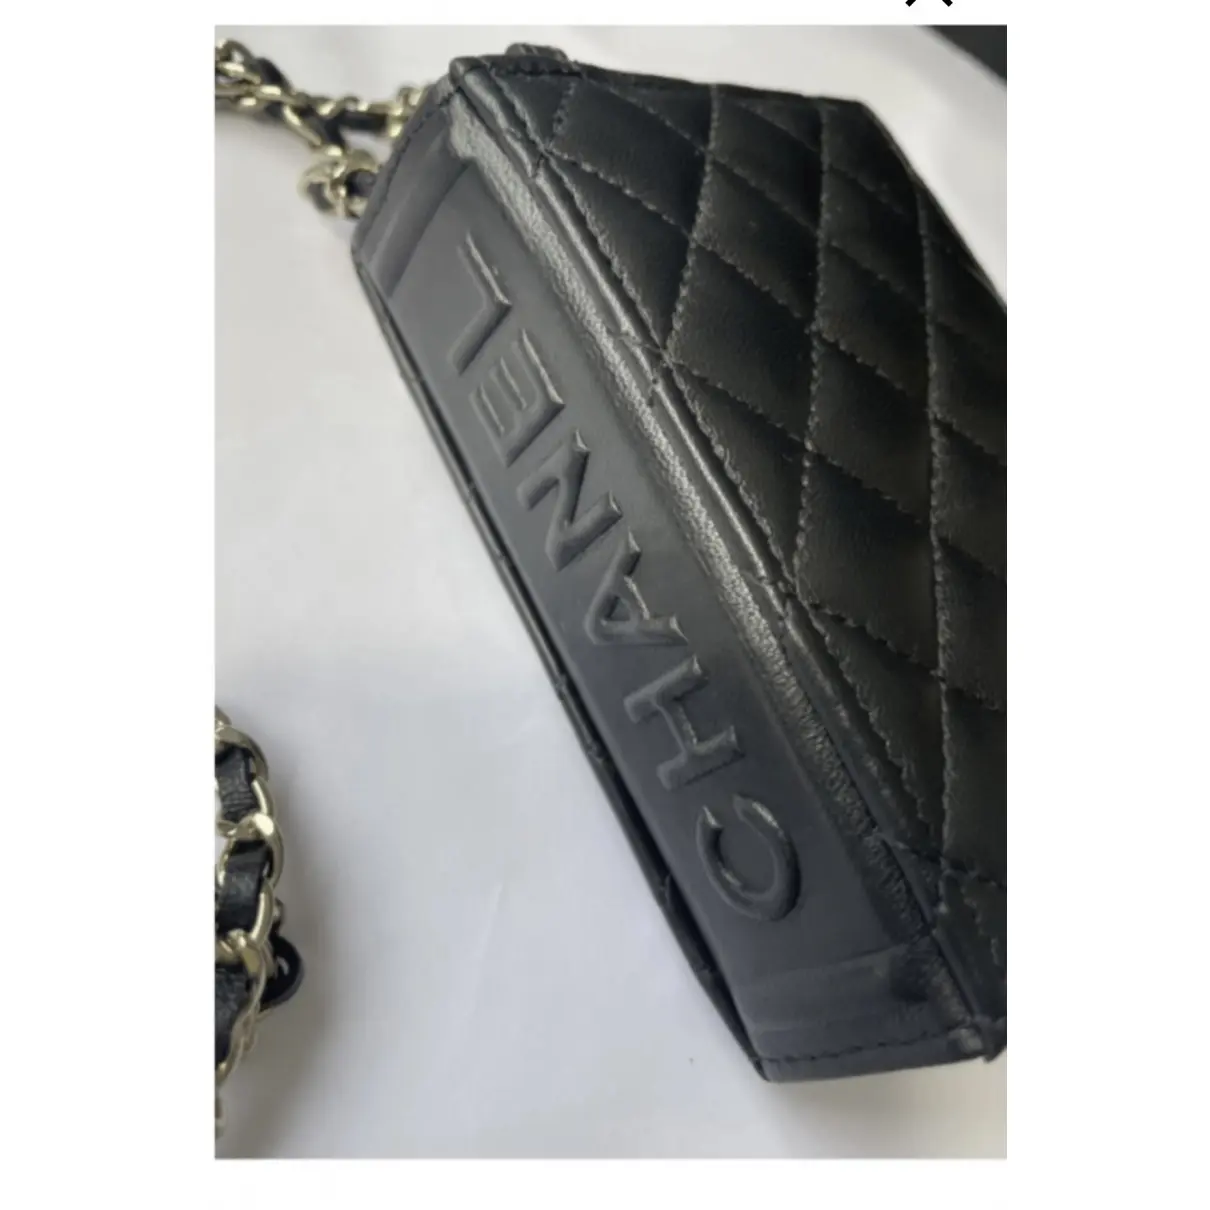 Buy Chanel Timeless/Classique leather crossbody bag online